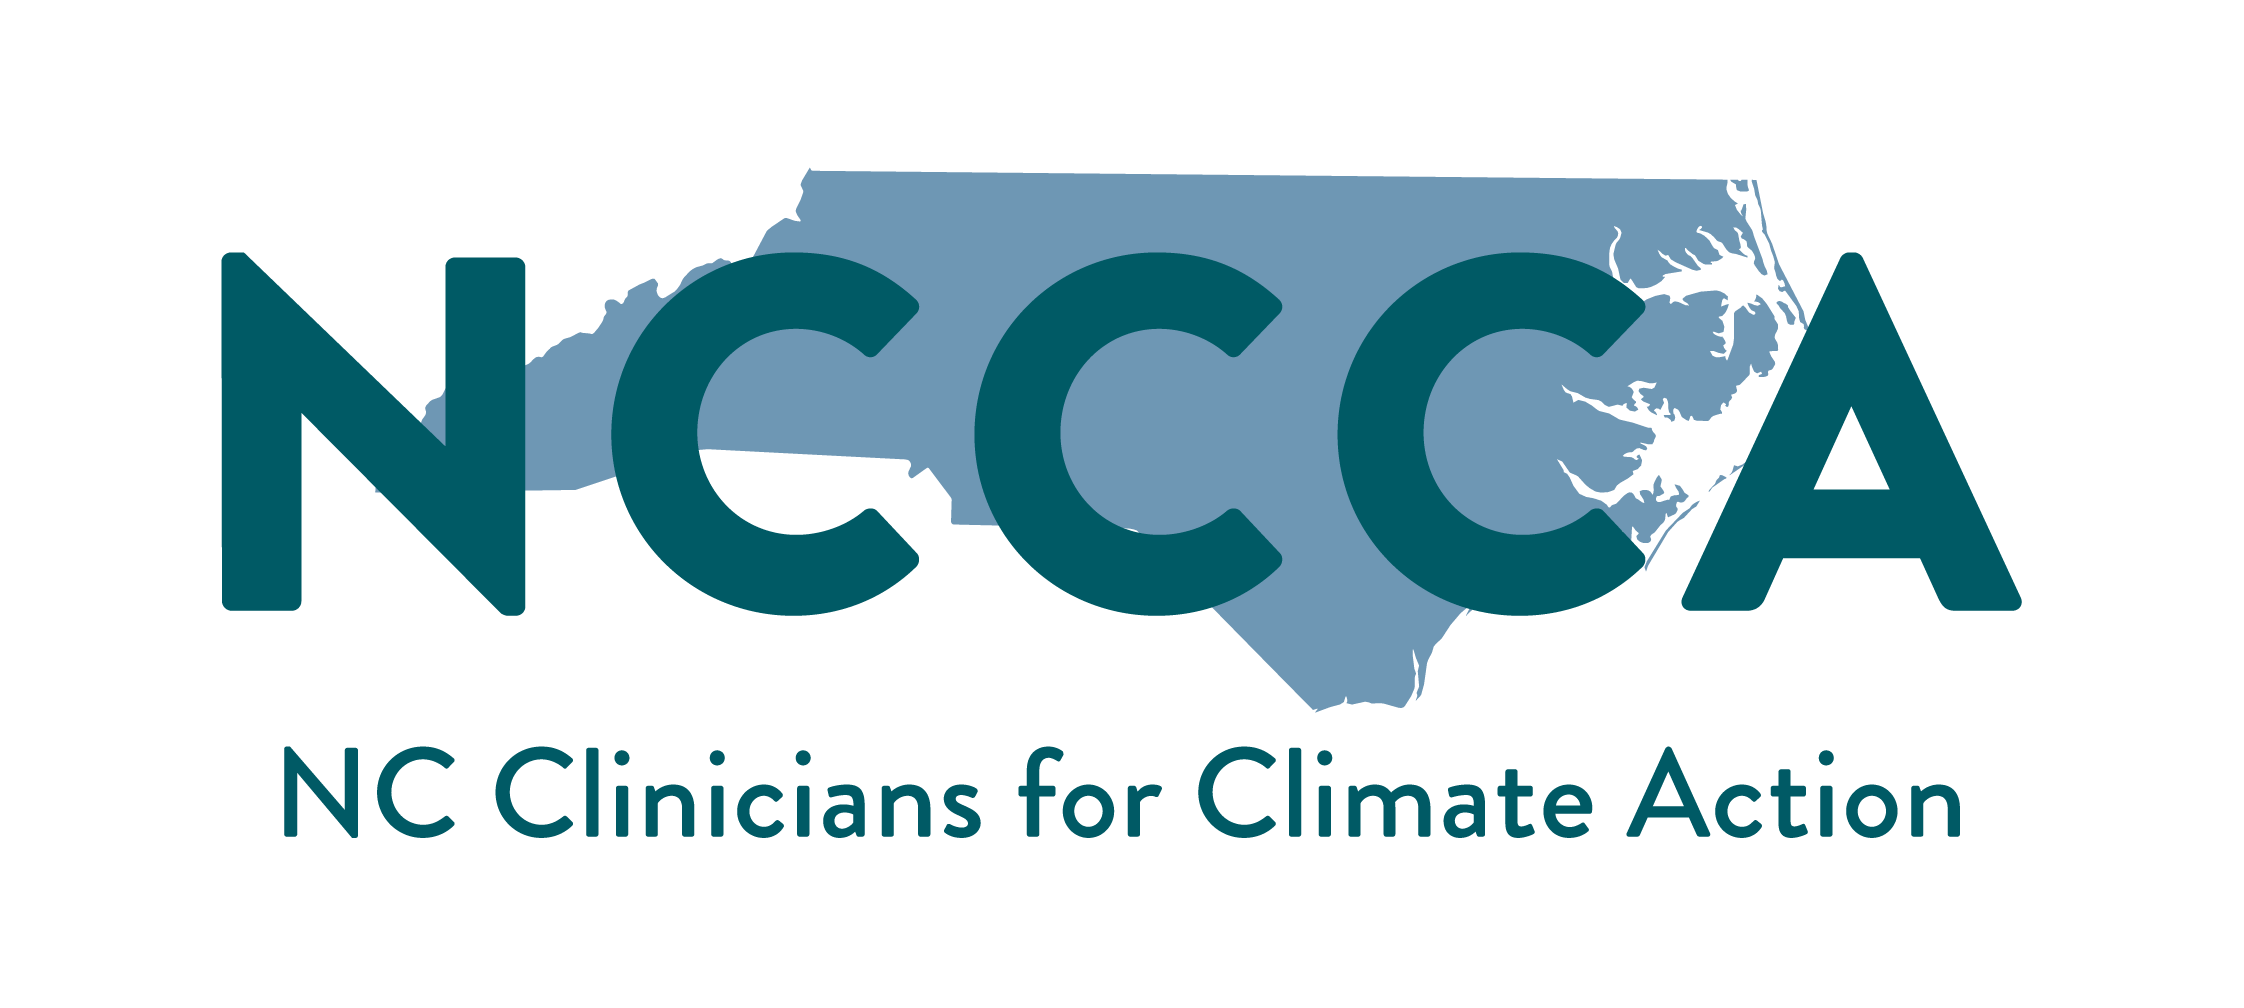 NC Clinicians for Climate Action